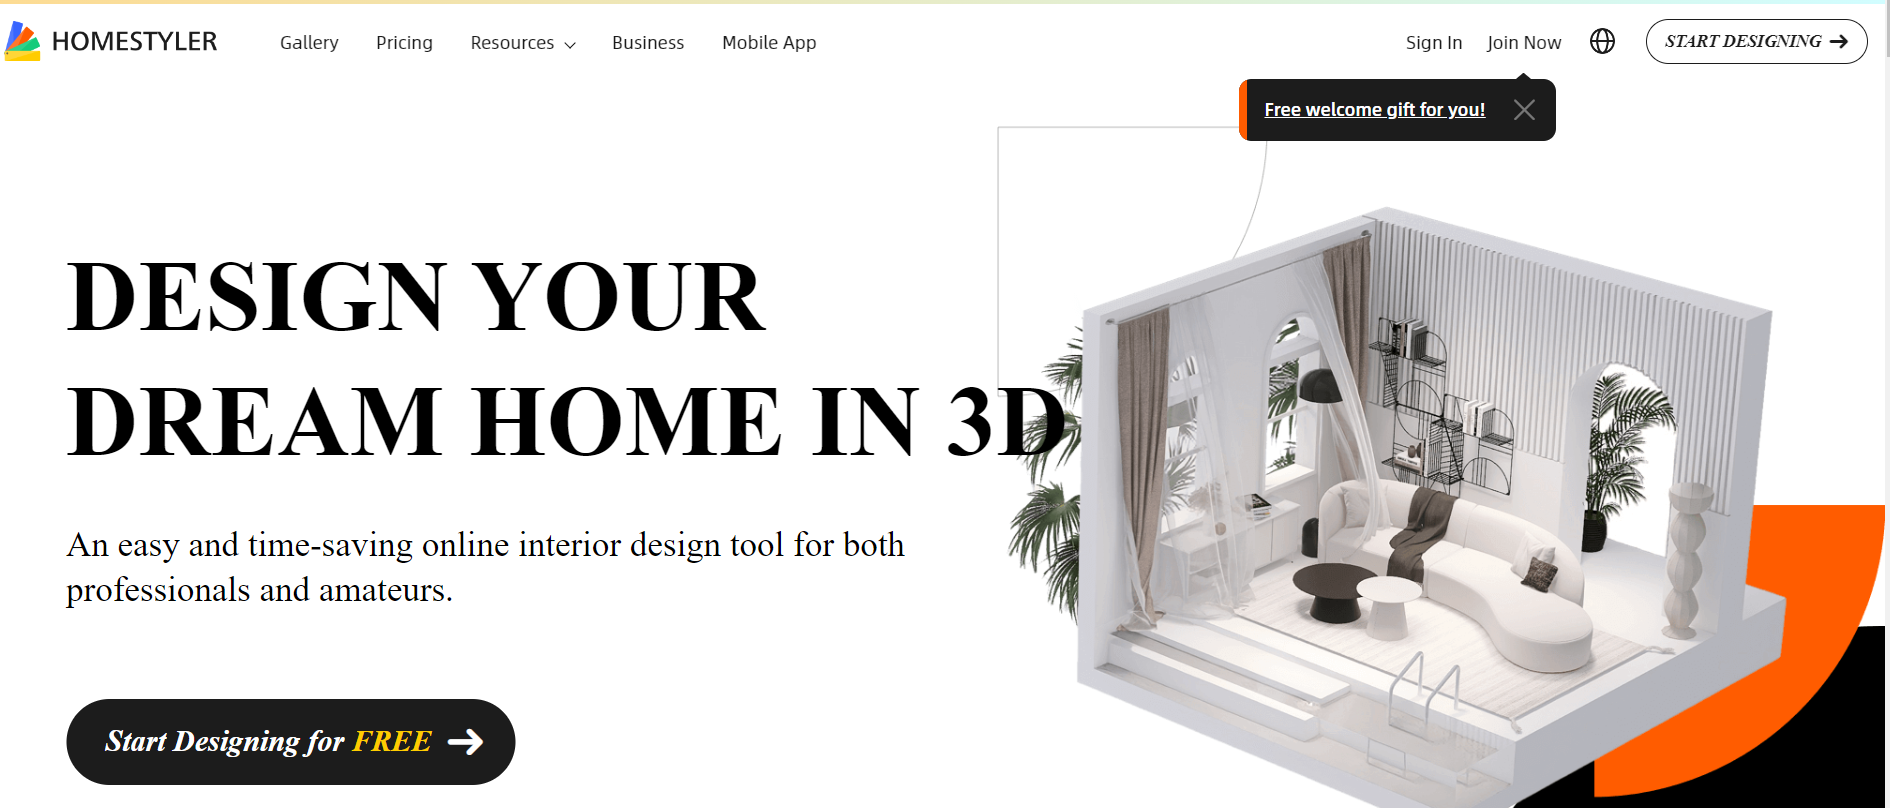 Homestyler : Best Home Design Software for Mac Users